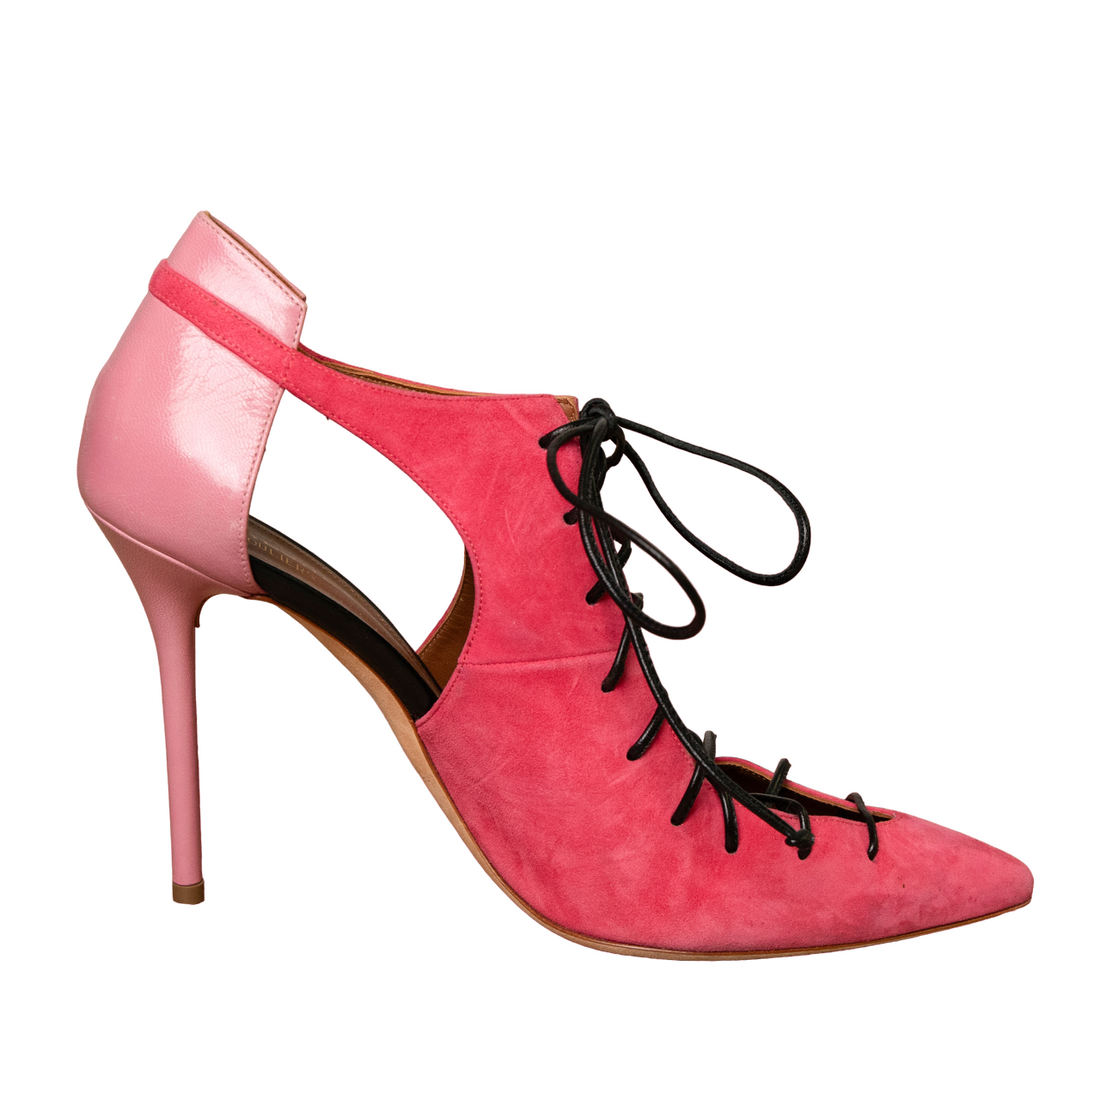 Malone Souliers lace-up ankle pumps